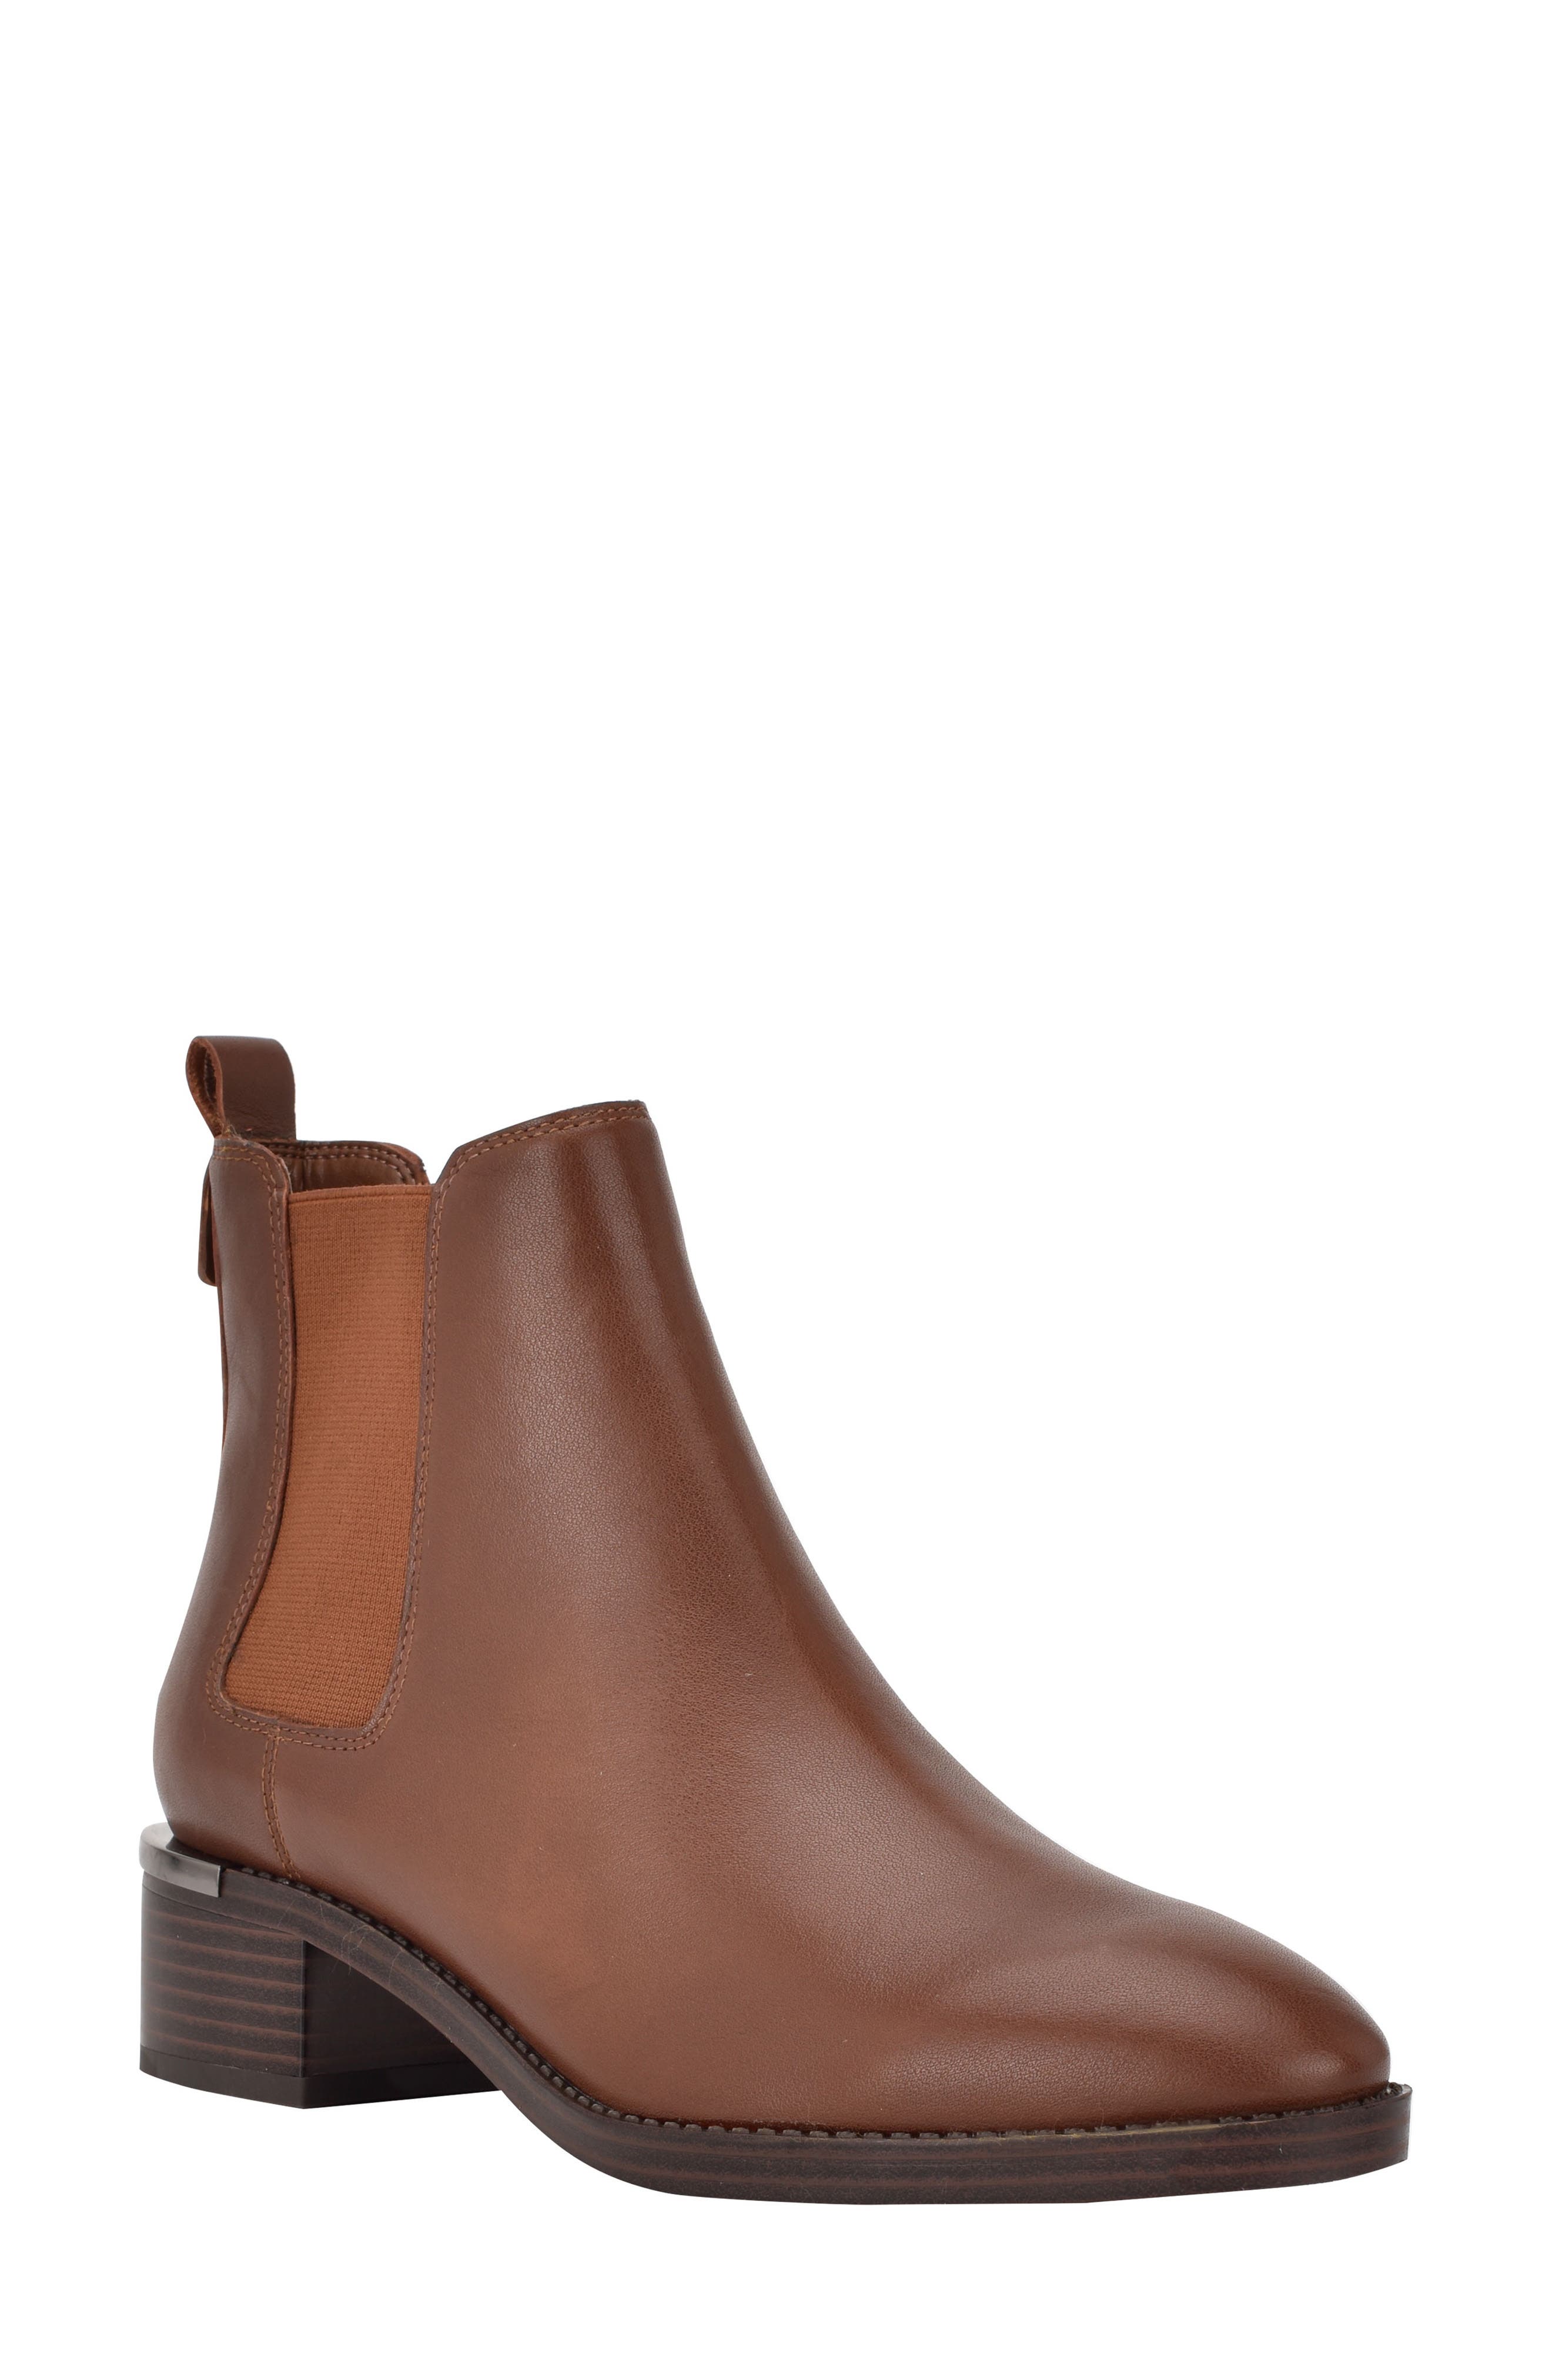 UPC 195972359154 product image for Calvin Klein Demmie Leather Chelsea Boot in Brown Leather at Nordstrom, Size 8 | upcitemdb.com